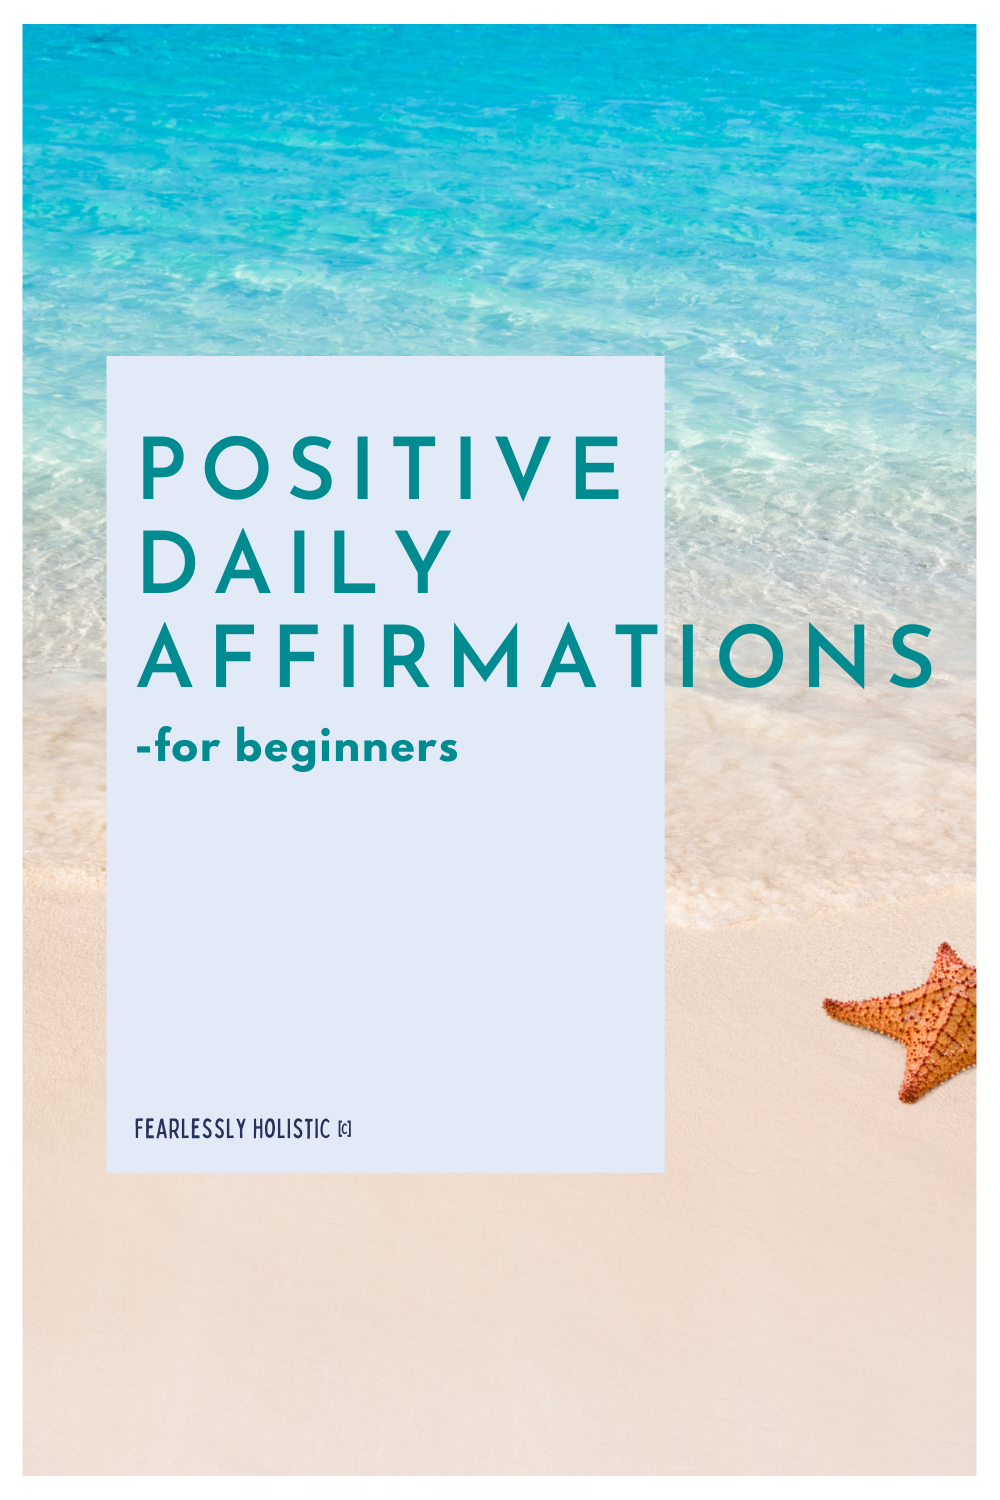 Positive Daily Affirmations - for Beginners